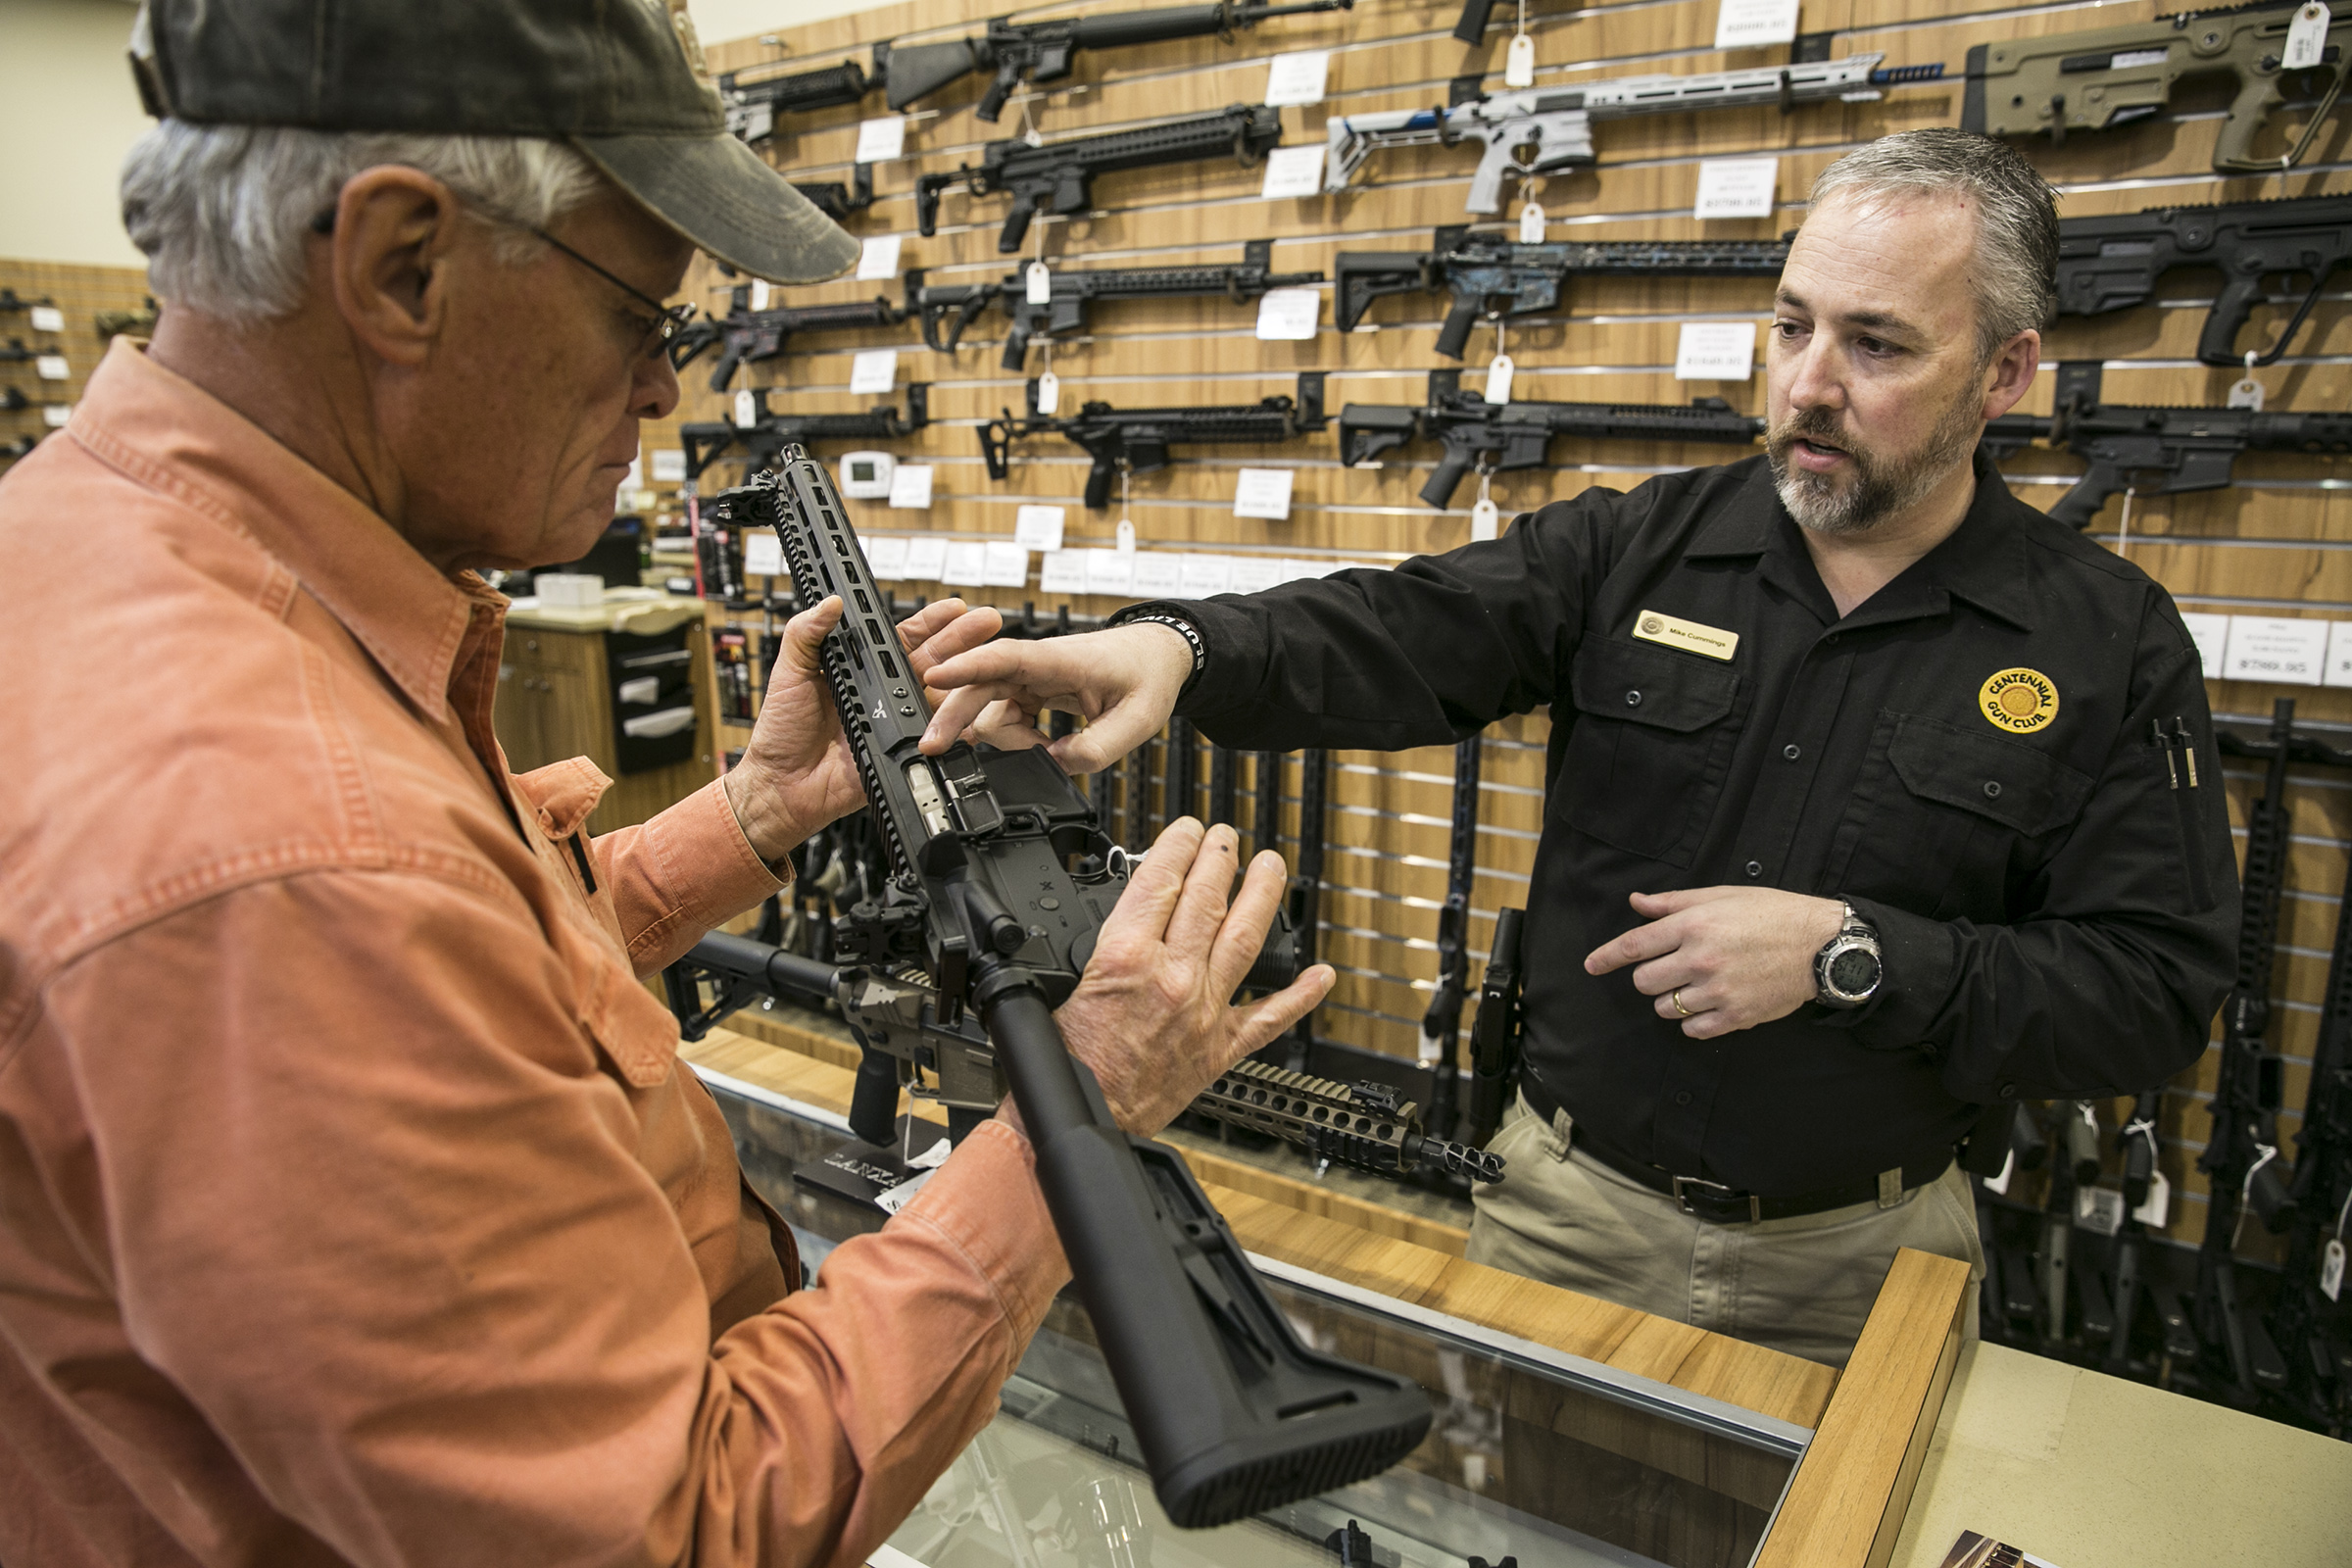 Mike Cummings with the Centennial Gun Club points out features on a long gun to customer Jim Collier of Centennial, Colorado on Wednesday, Nov 2. 2016.